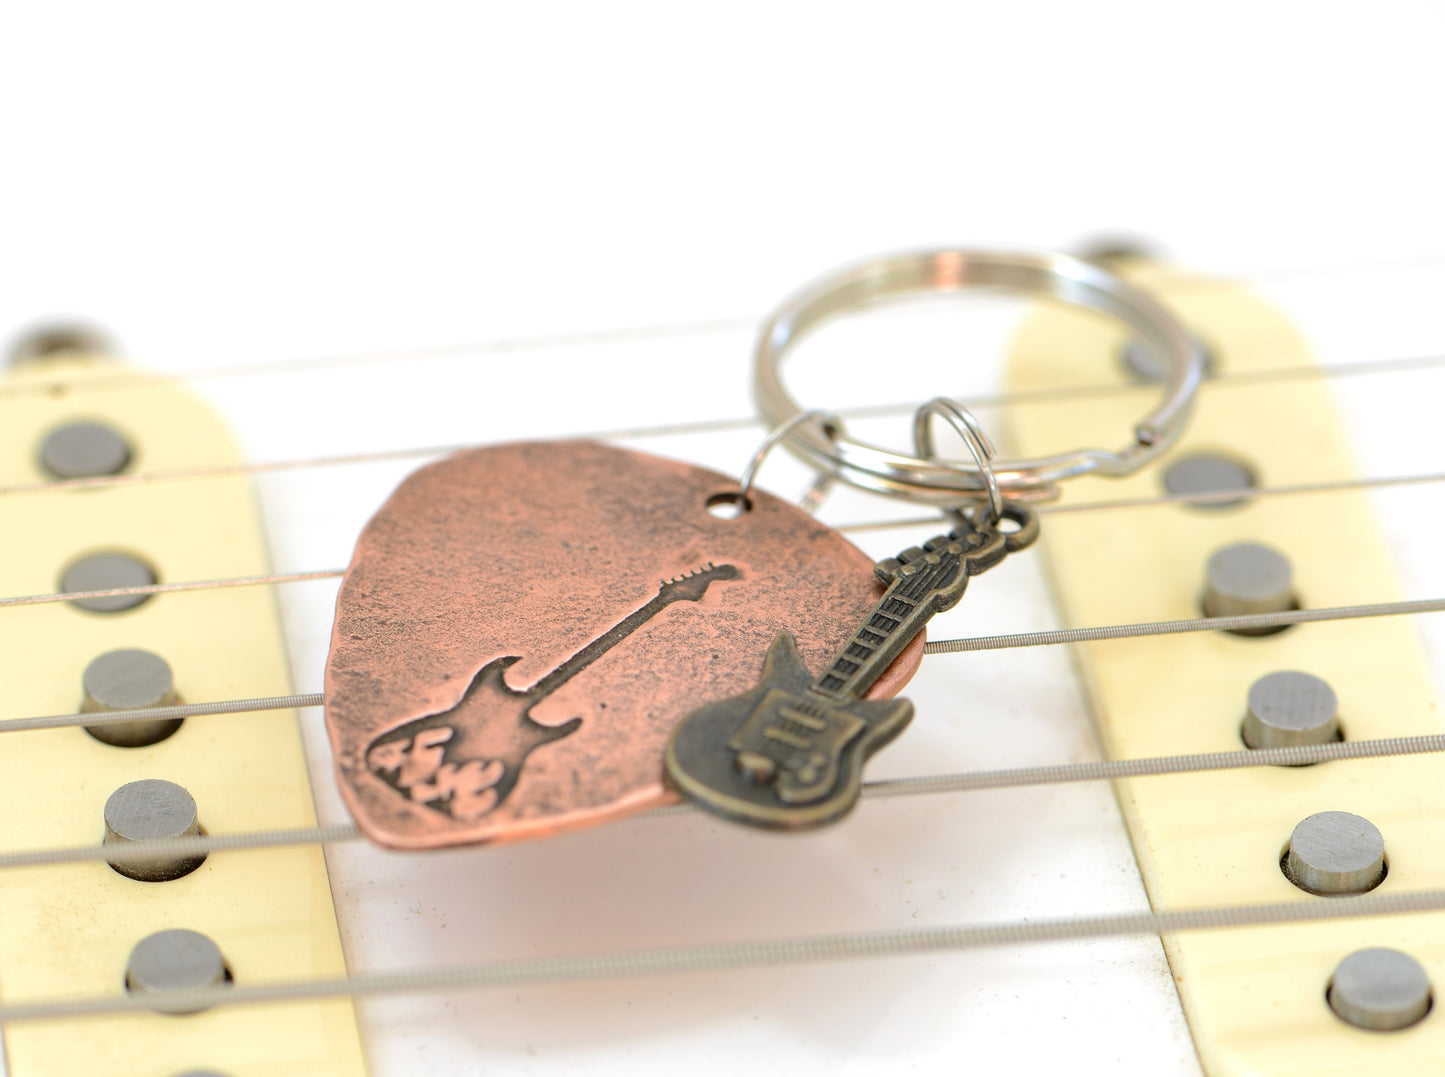 Flaming Design on a Guitar Guitar Pick Keychain